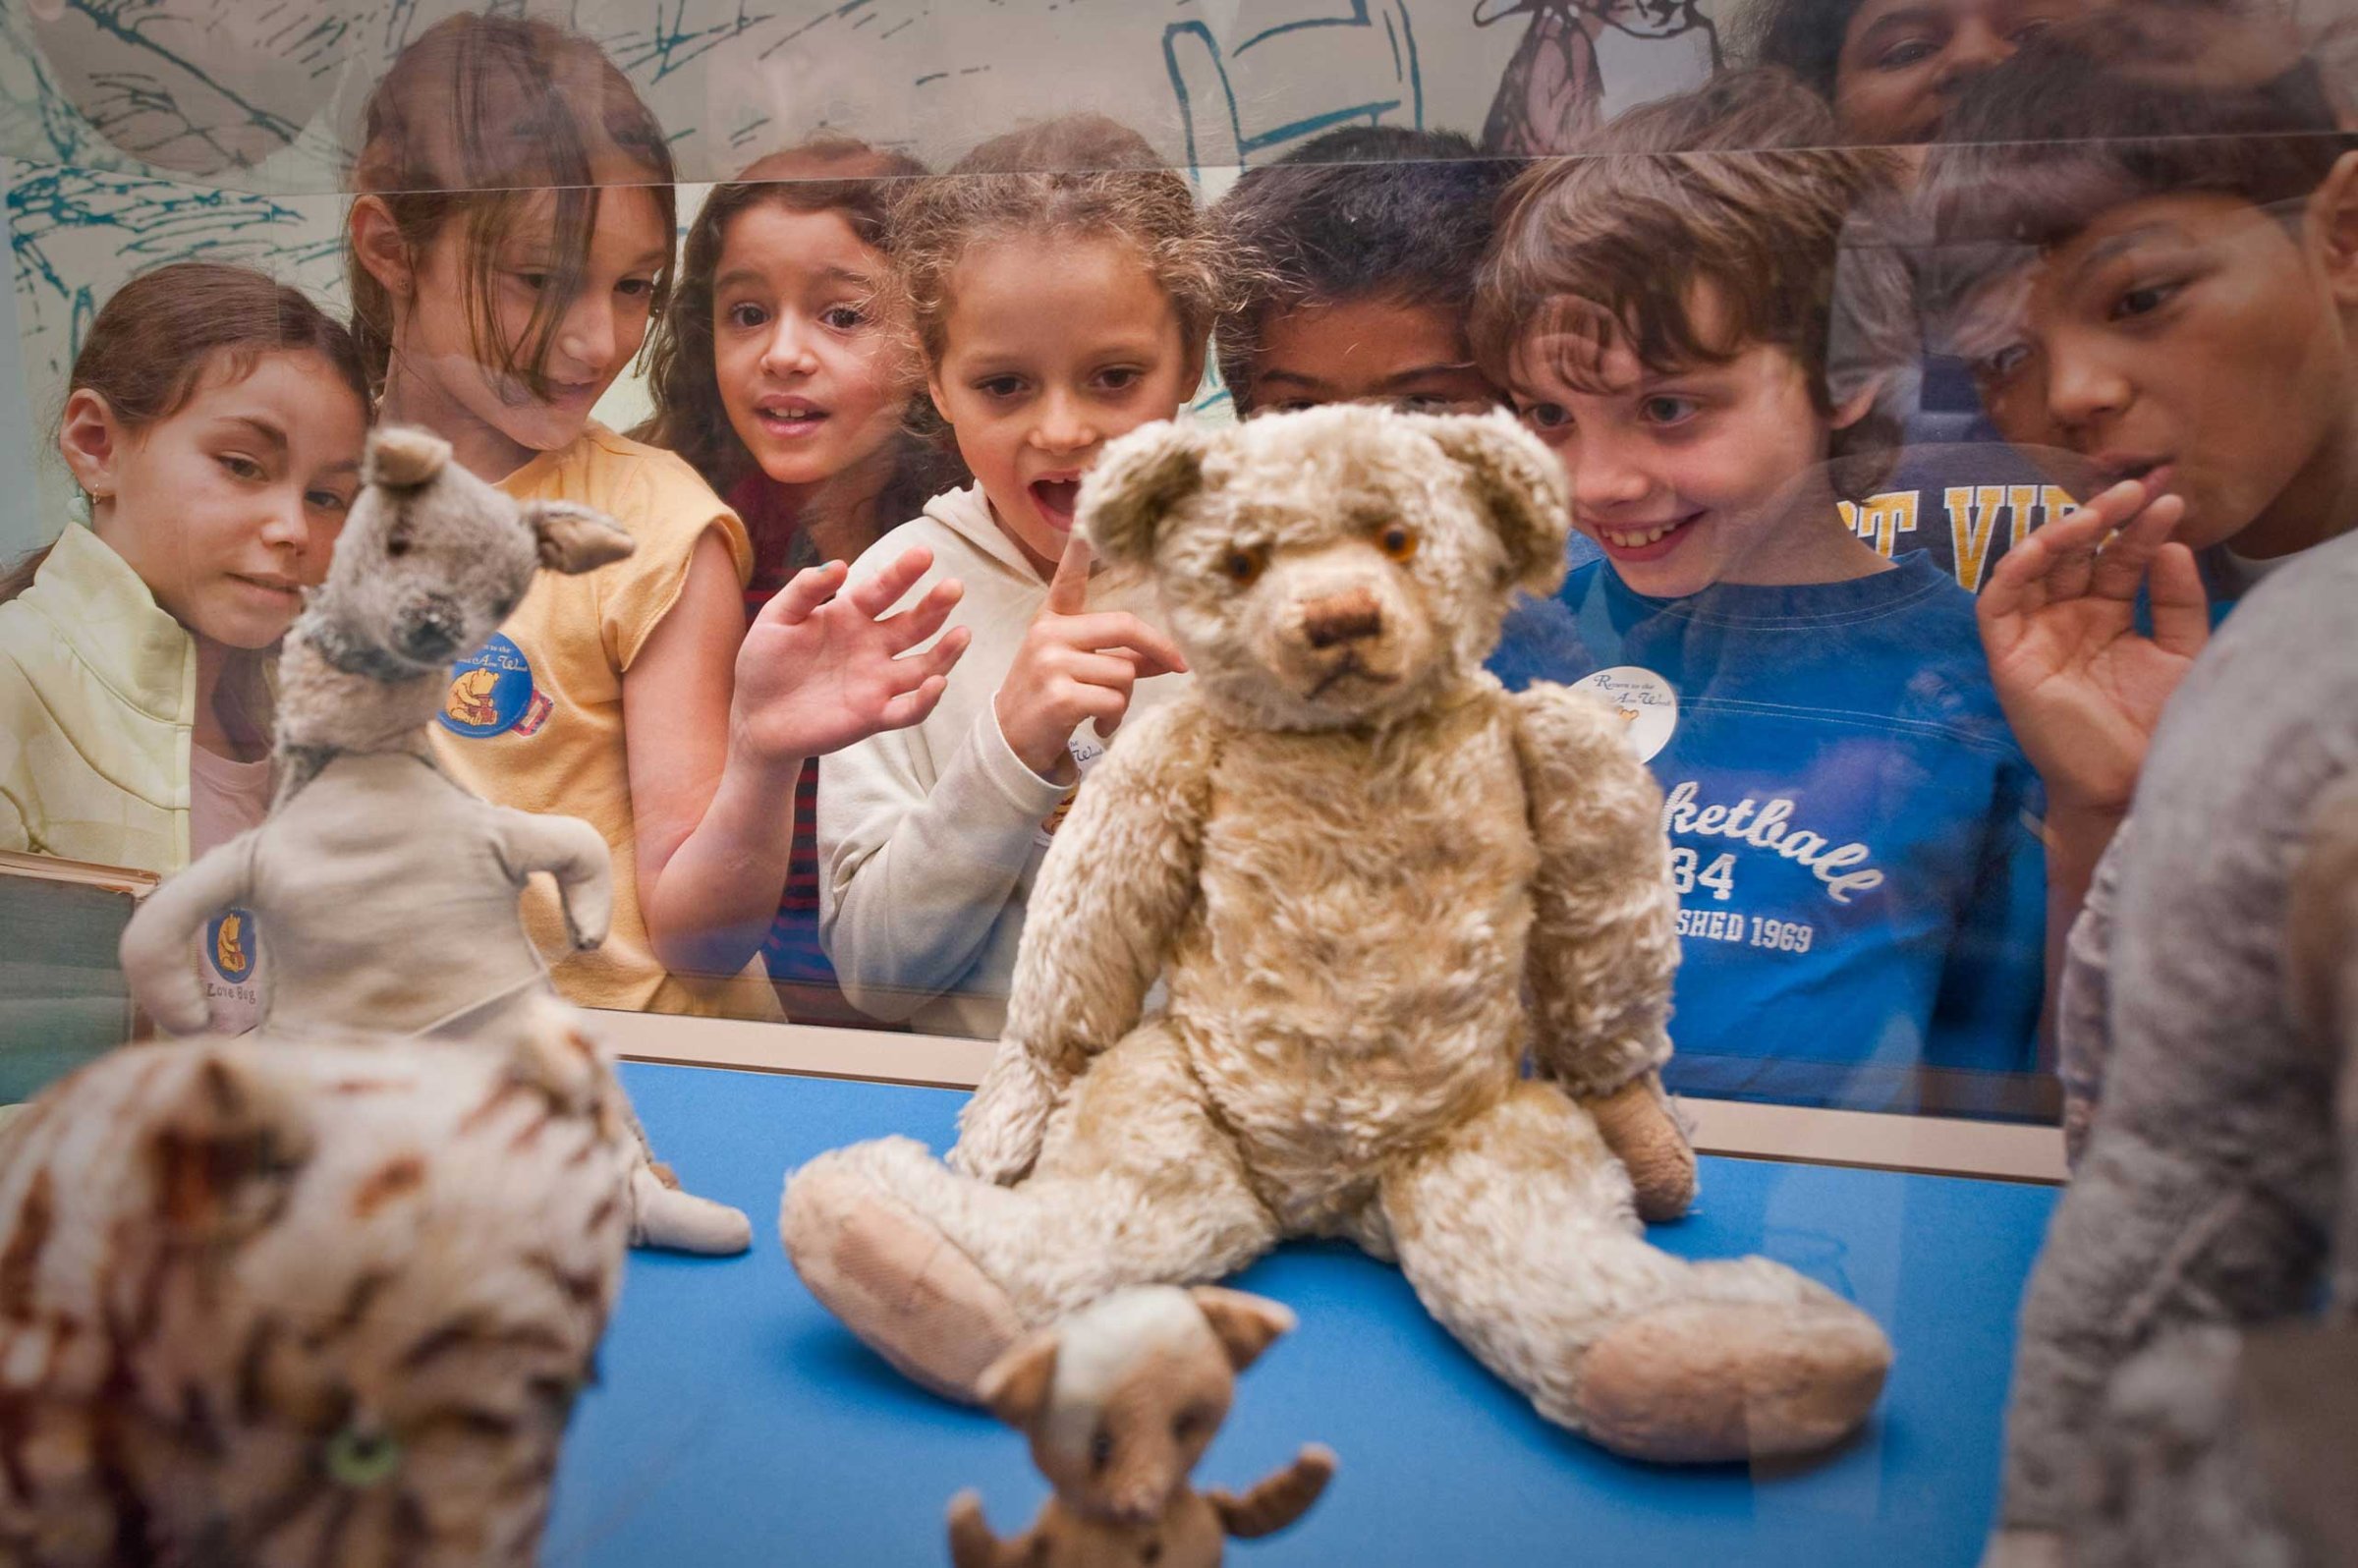 School children view the original Winnie the Pooh stuffed animals at the New York Public Library in 2009.